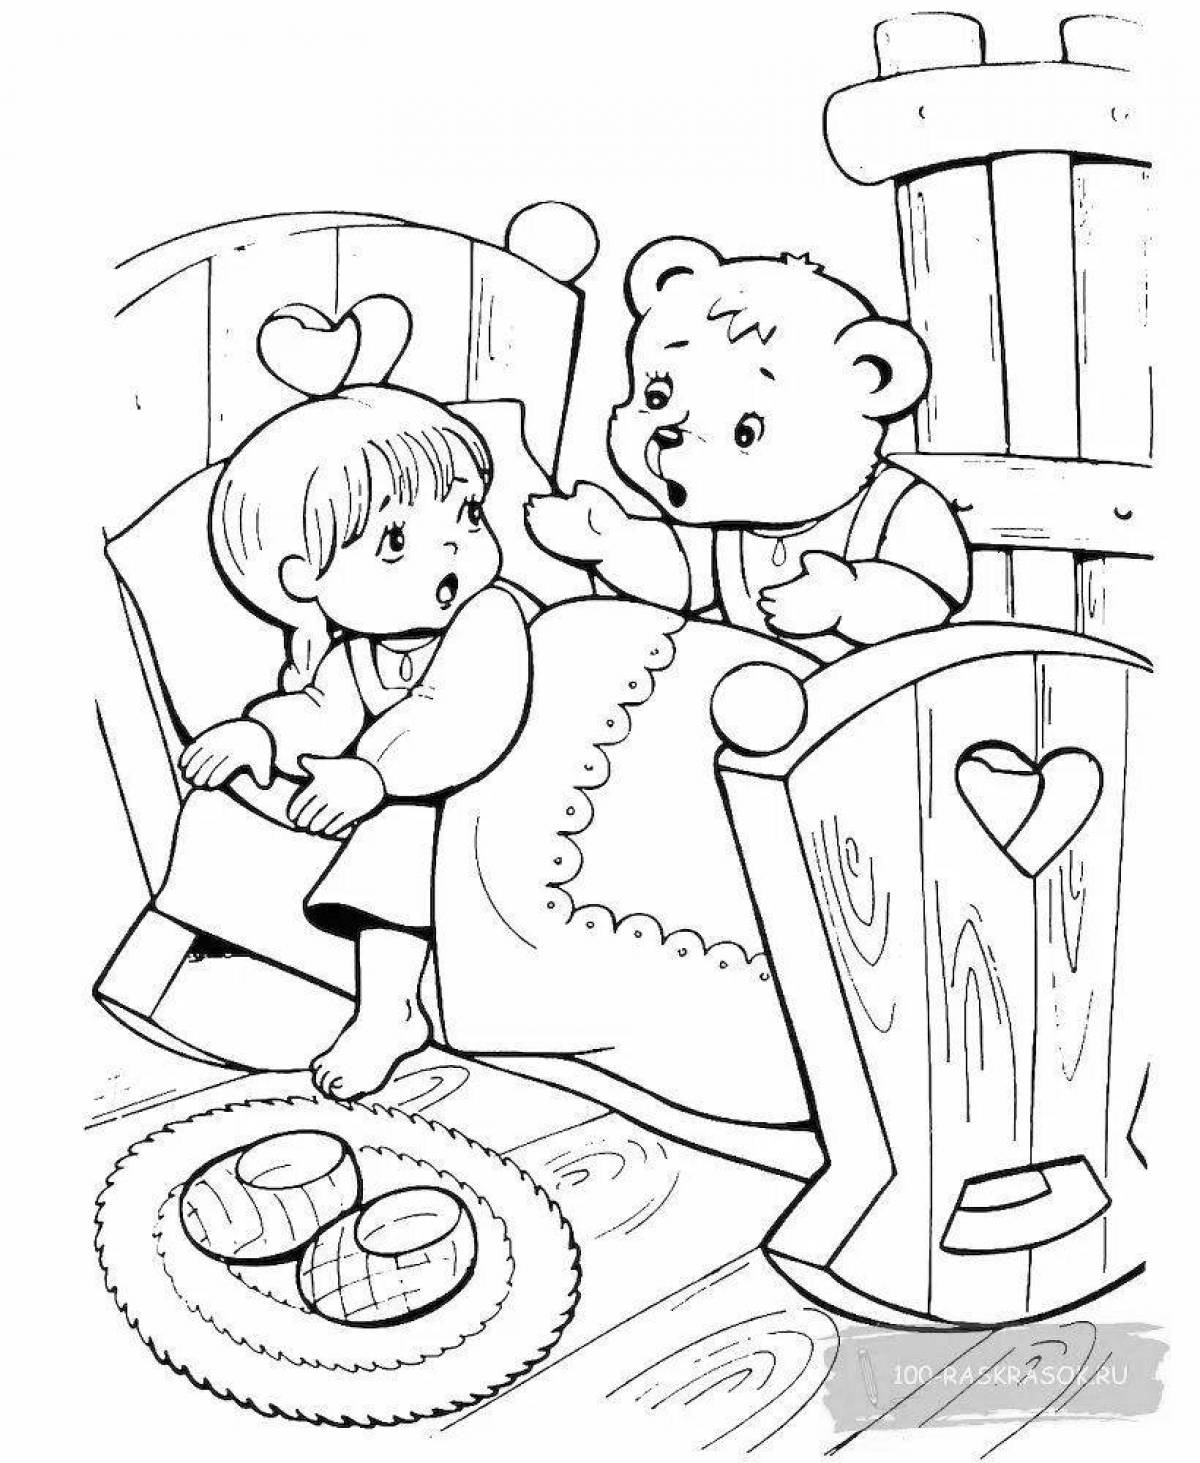 Fascinating three bears coloring book for 2-3 year olds